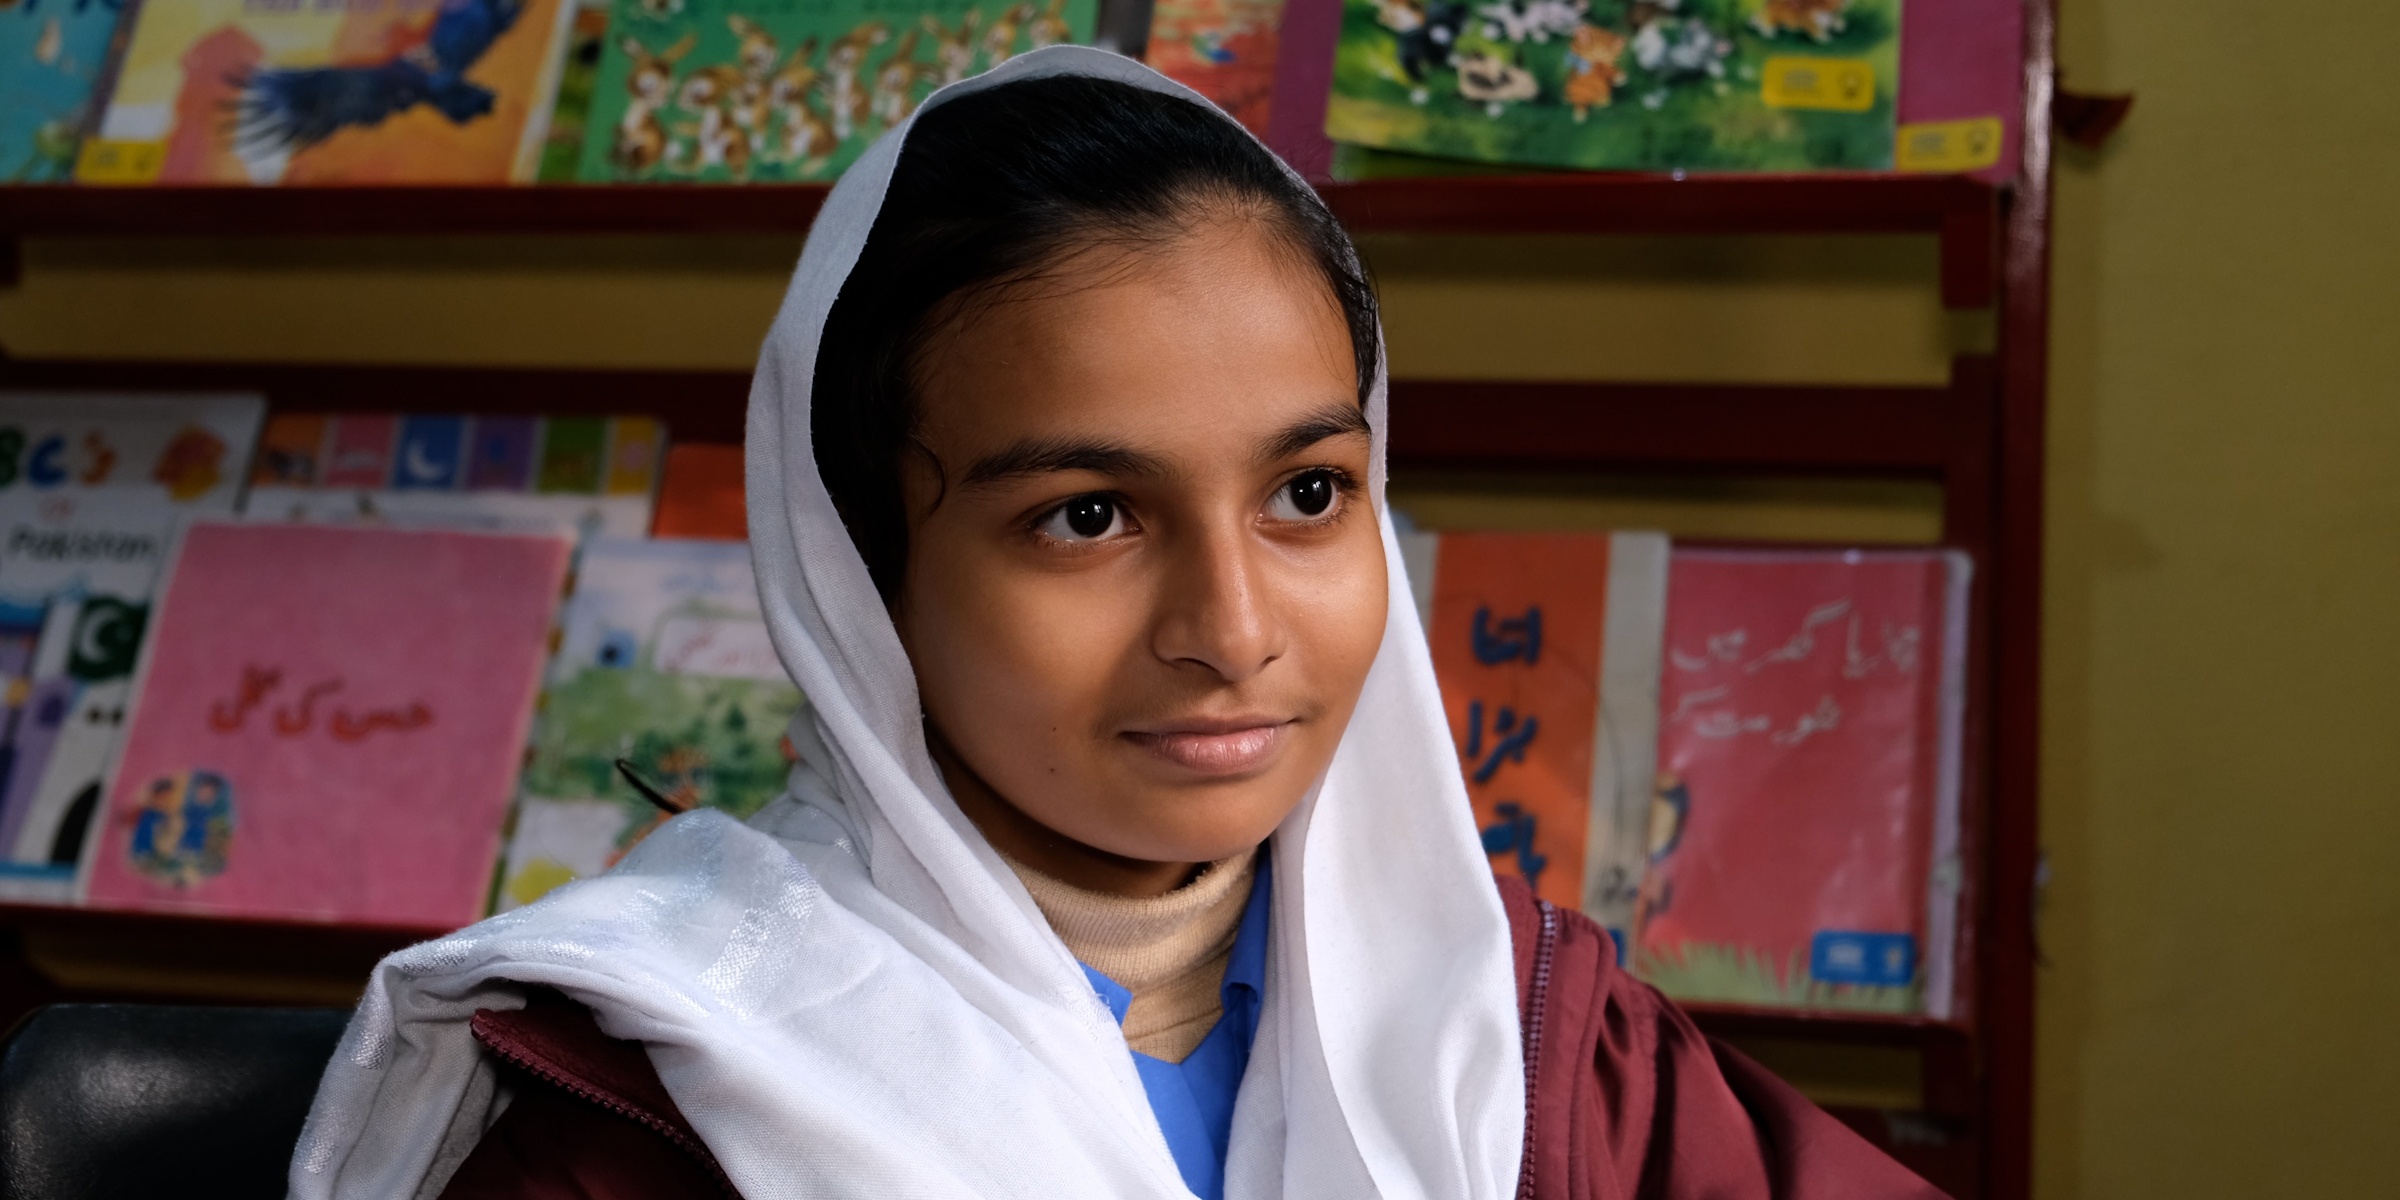 Mehreen Hashim, 12, attends the afternoon school program for girls at the Government Girl Primary School Nishtar Colony, Lahore, Pakistan.